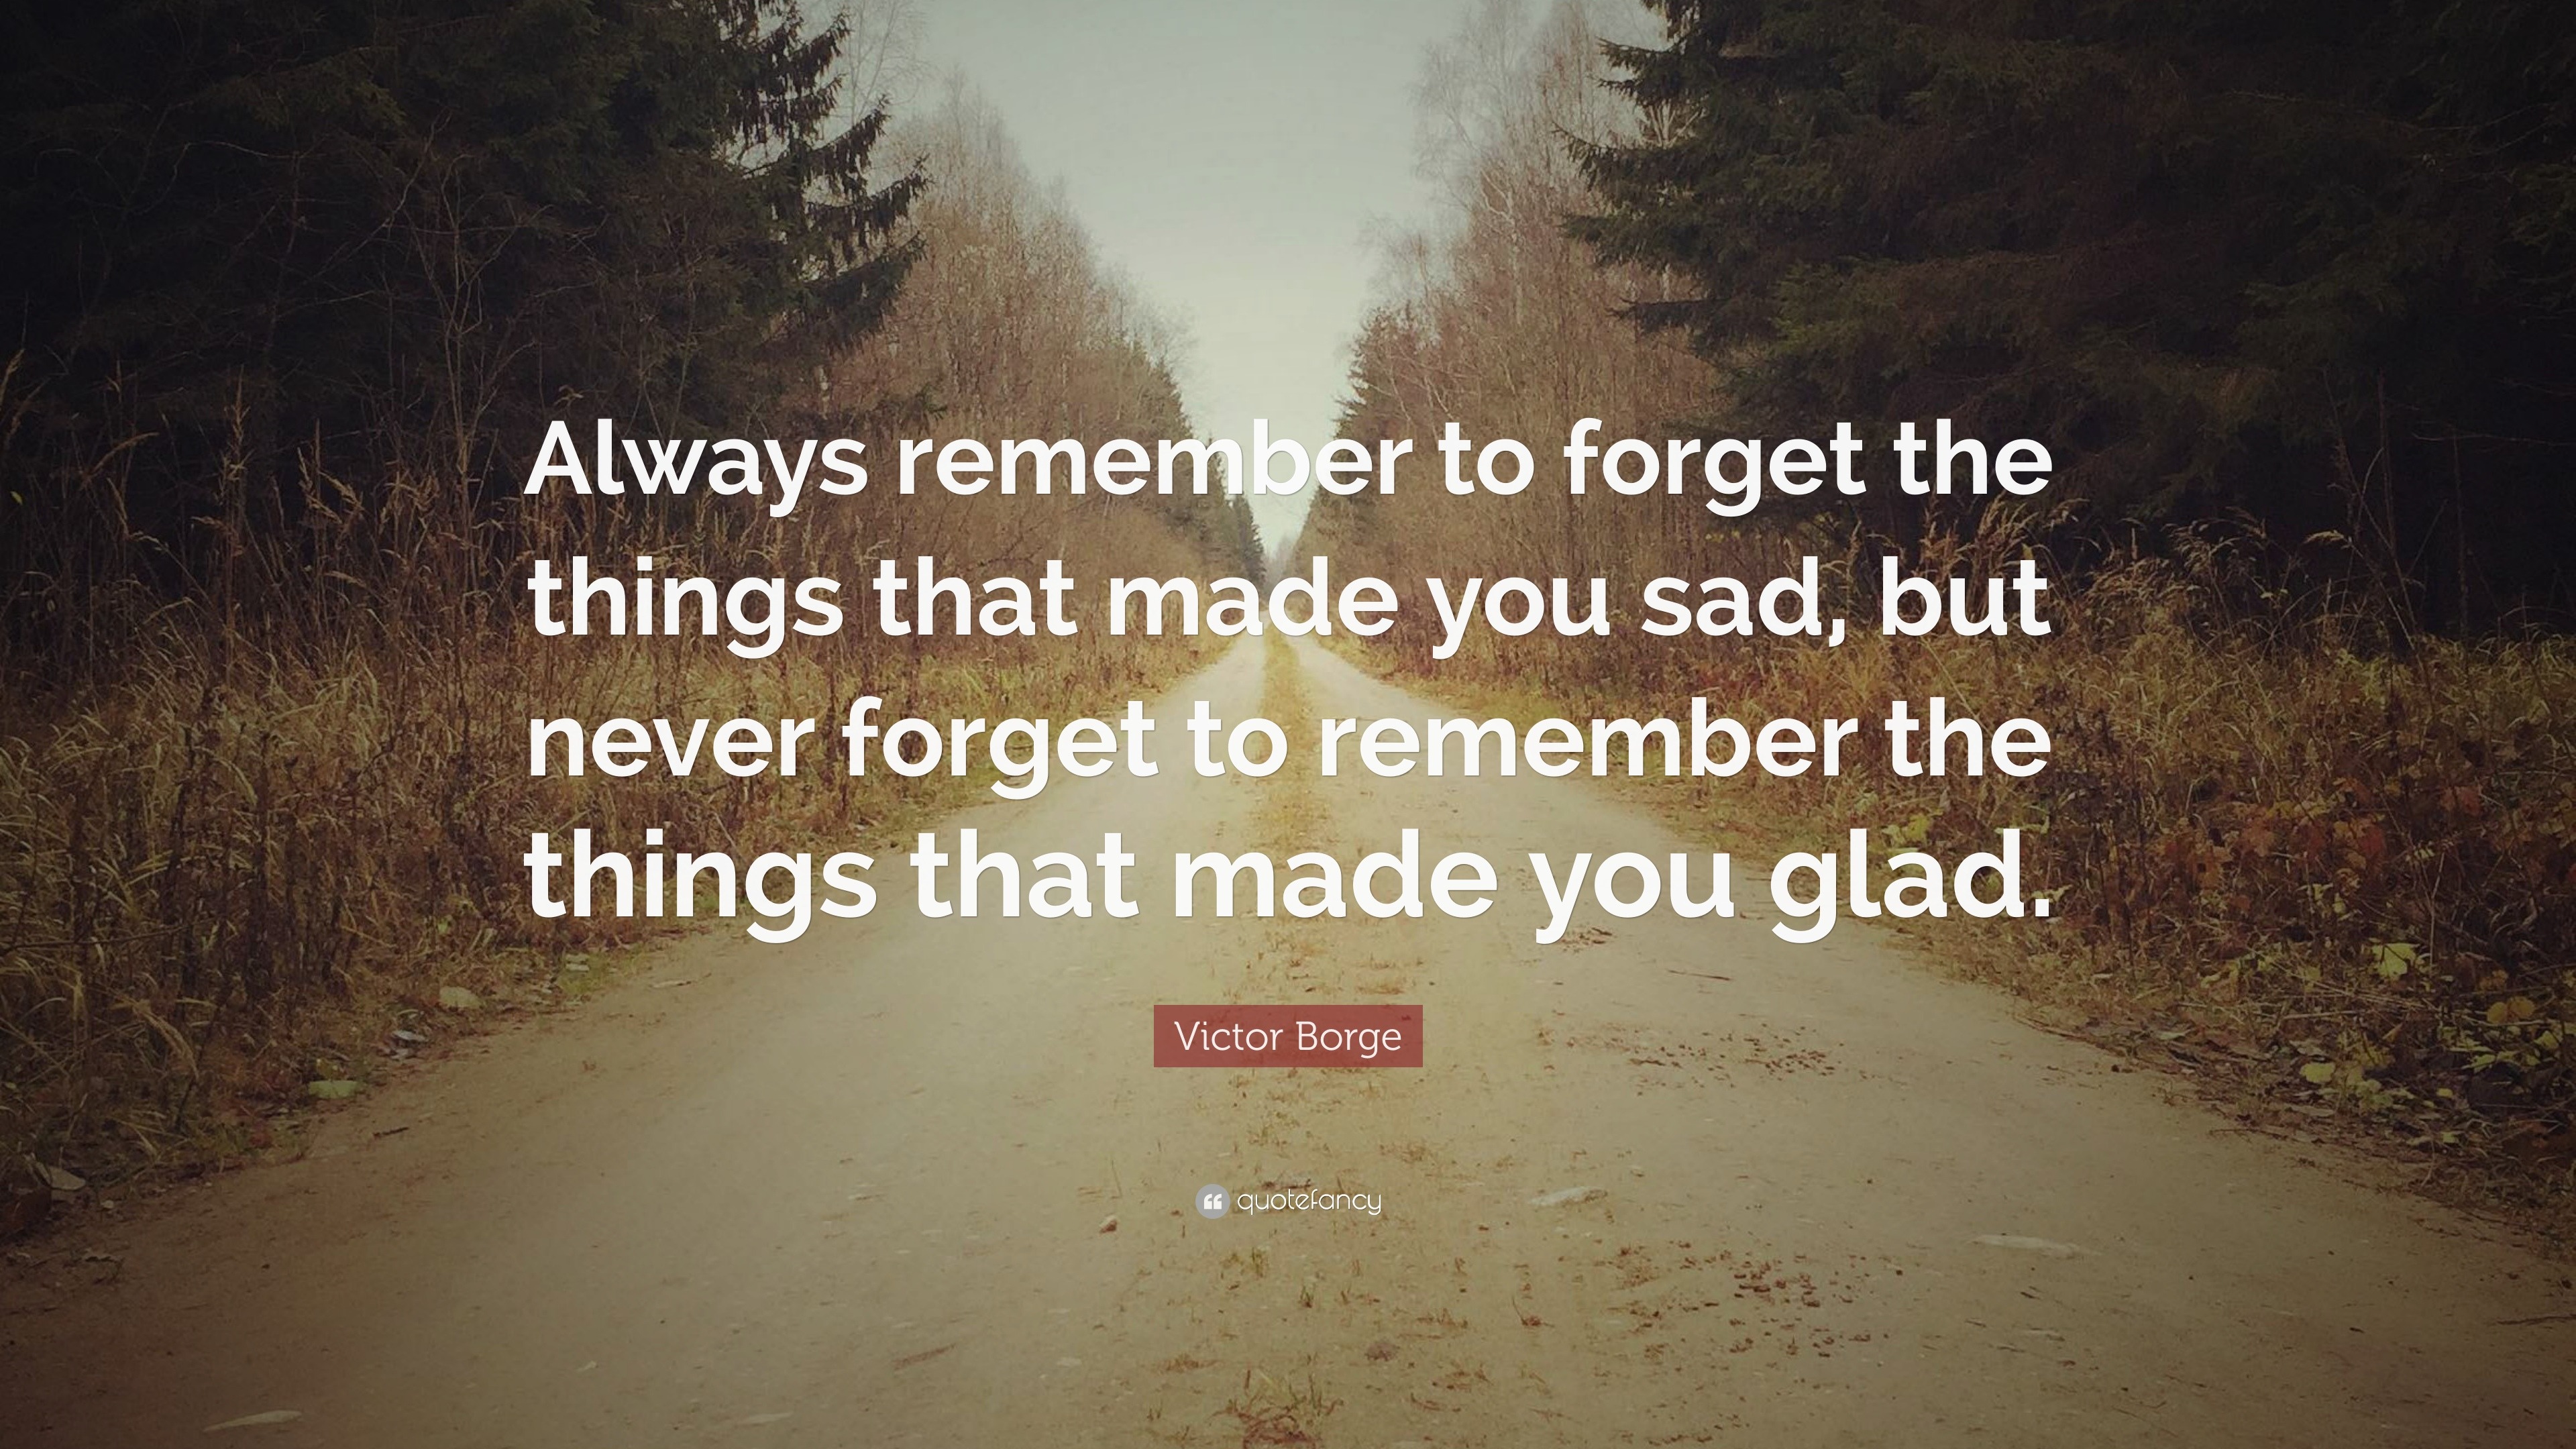 Victor Borge Quote: “Always remember to forget the things that made you